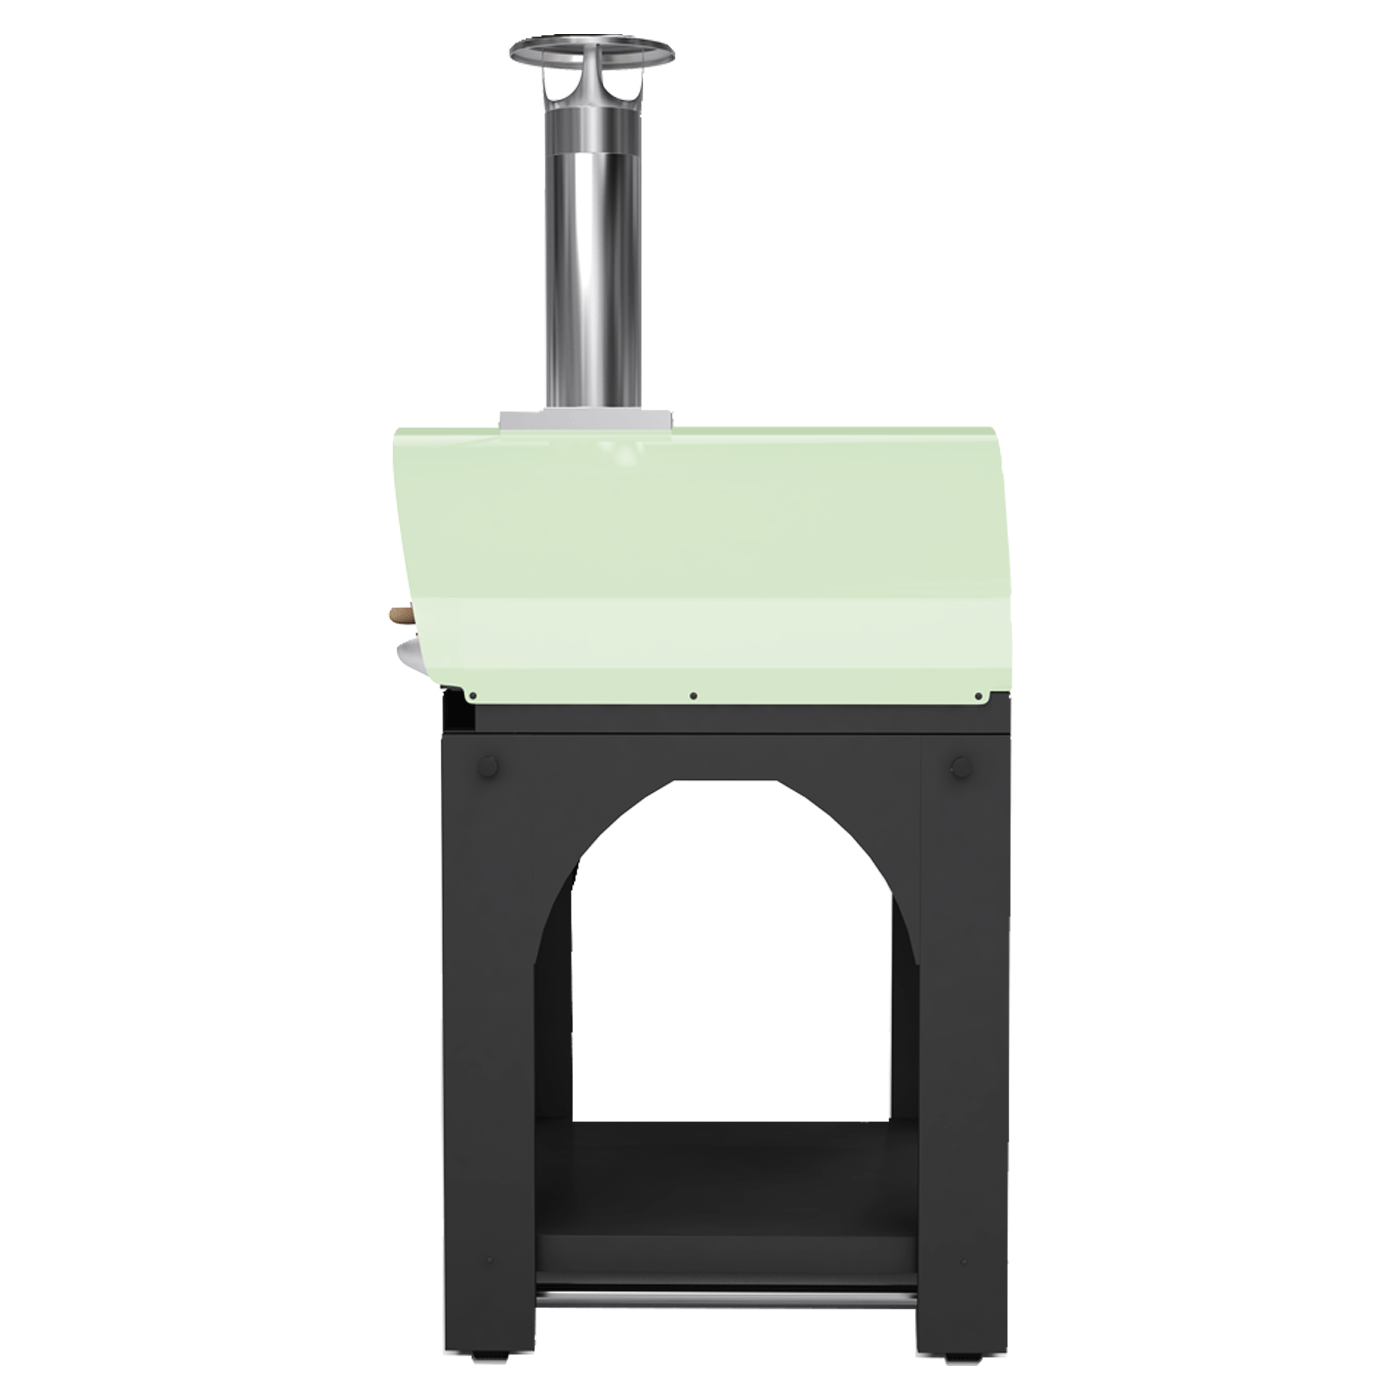 Belforno Piccolo Portable Wood-fired Pizza Oven - Kitchen King Direct